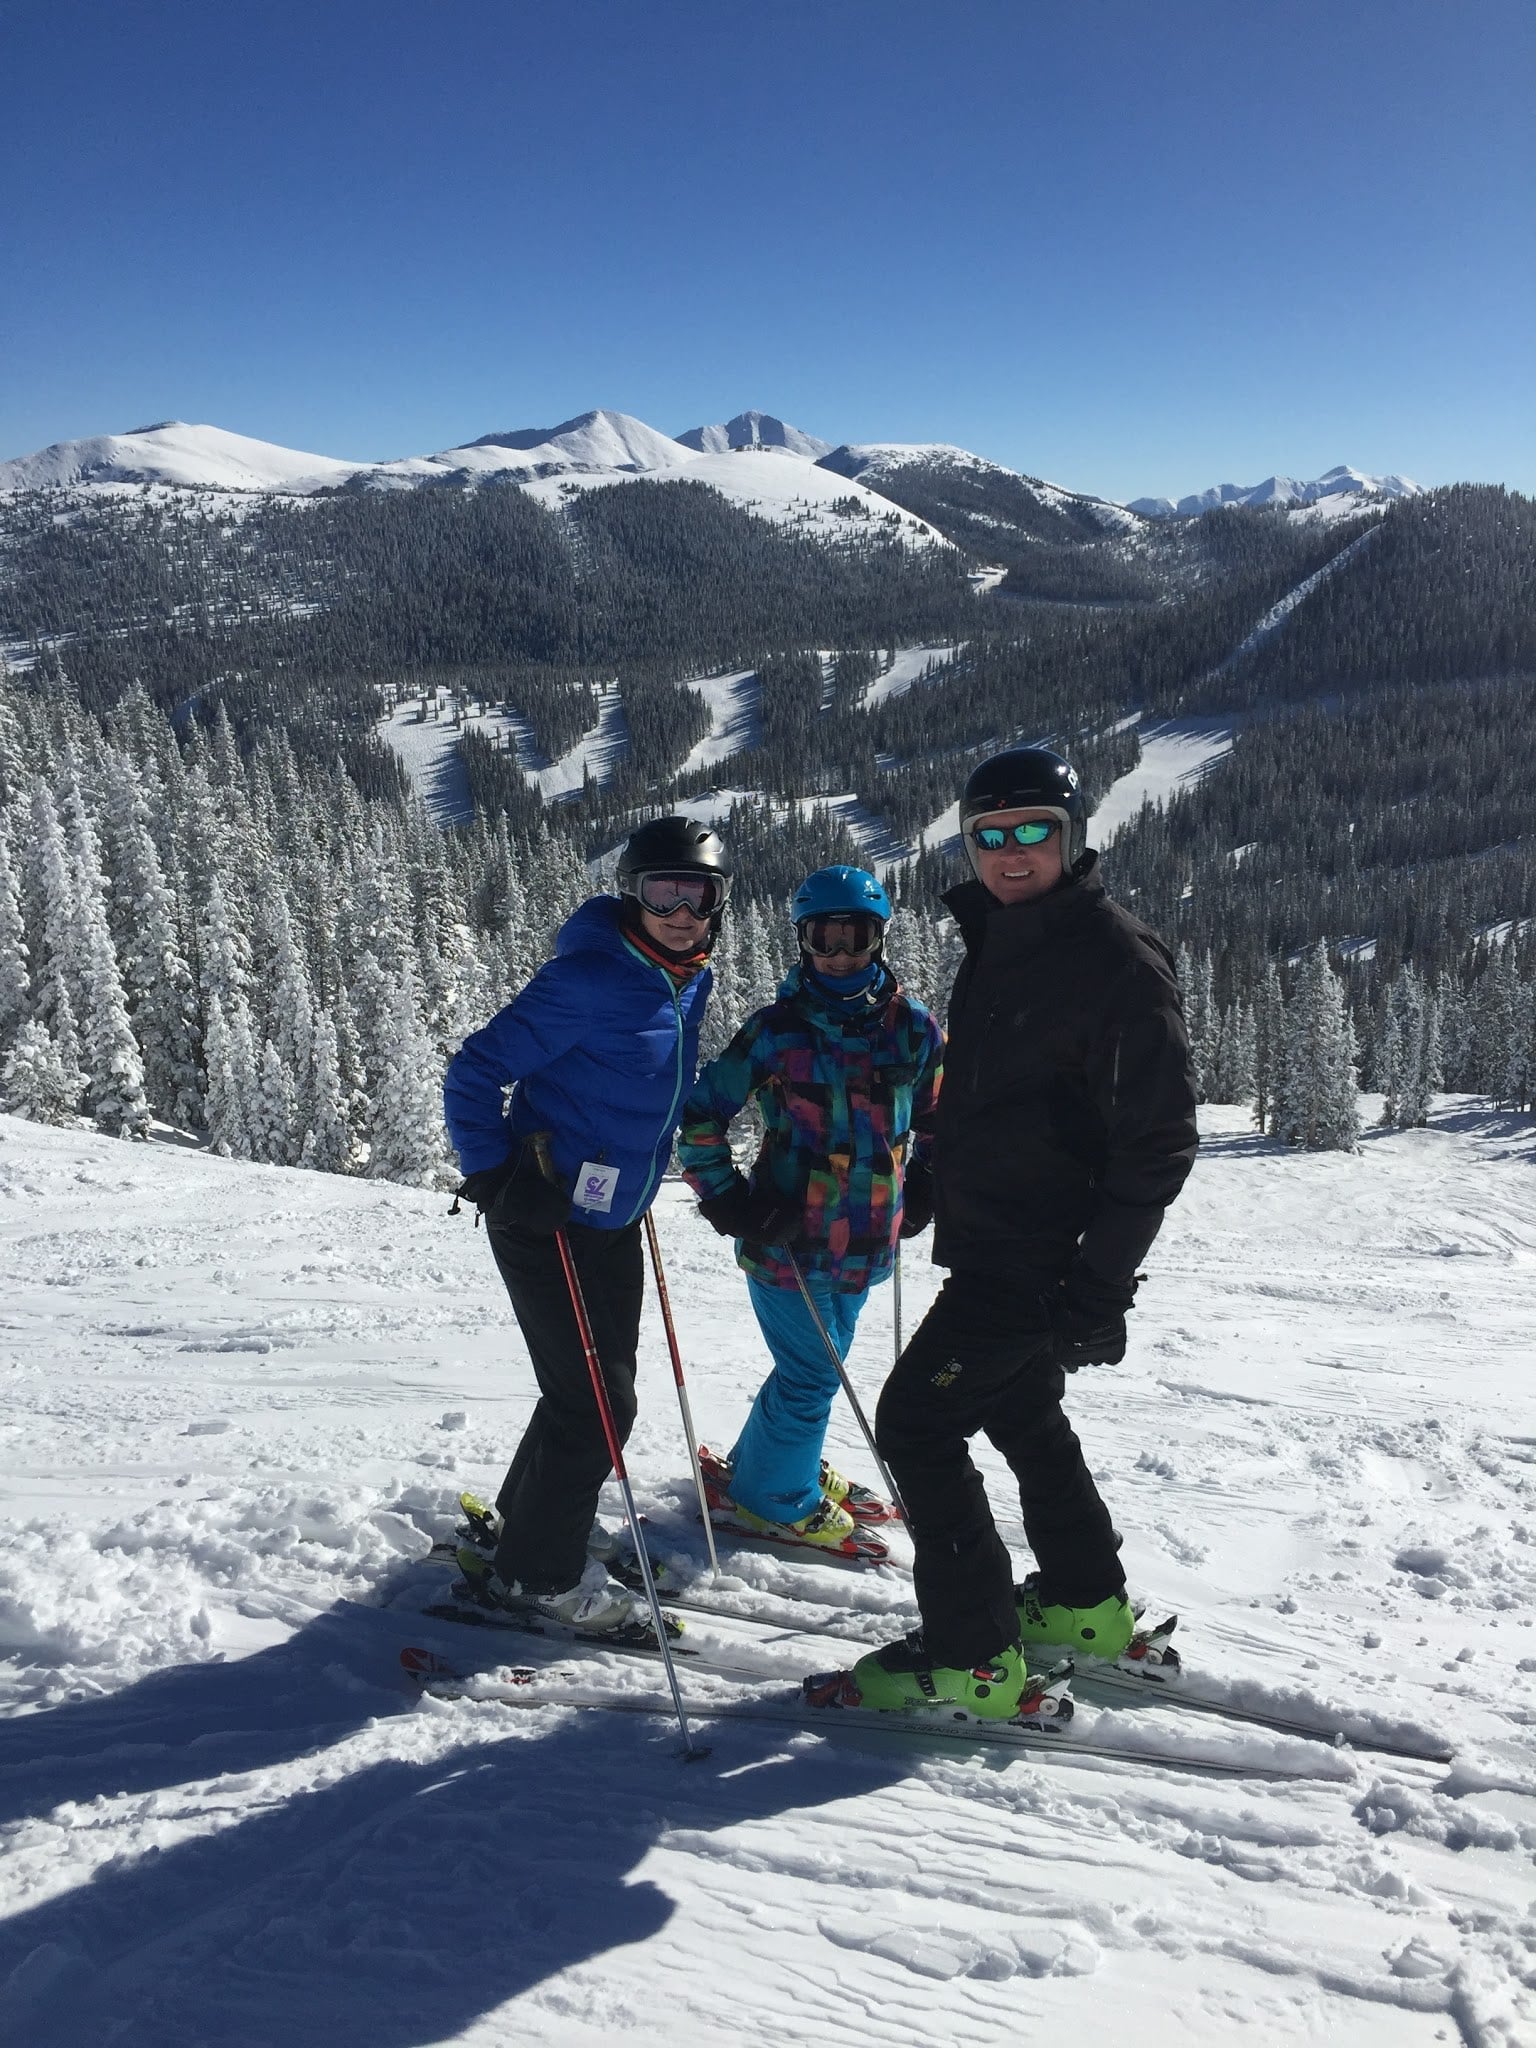 A family skiing on a sunny winter day.